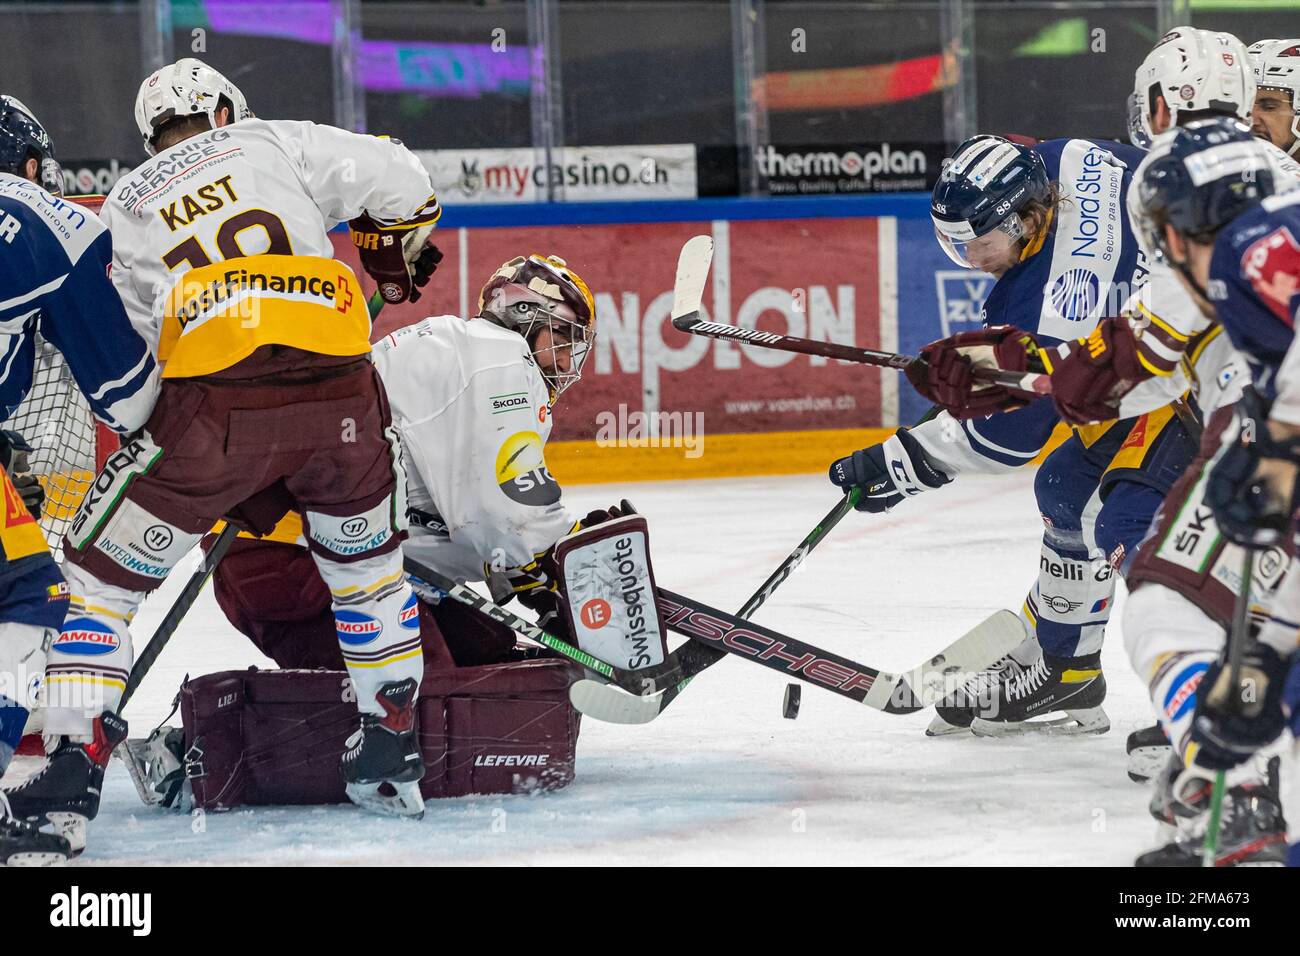 # 79 goalkeeper Daniel Manzato (Geneva) against # 88 Sven Senteler (Zug) during the National League Playoff Final ice hockey game 3 between EV Zug and Geneve-Servette HC on May 7th, 2021 in the Bossard Arena in Zug. (Switzerland/Croatia OUT) Credit: SPP Sport Press Photo. /Alamy Live News Stock Photo